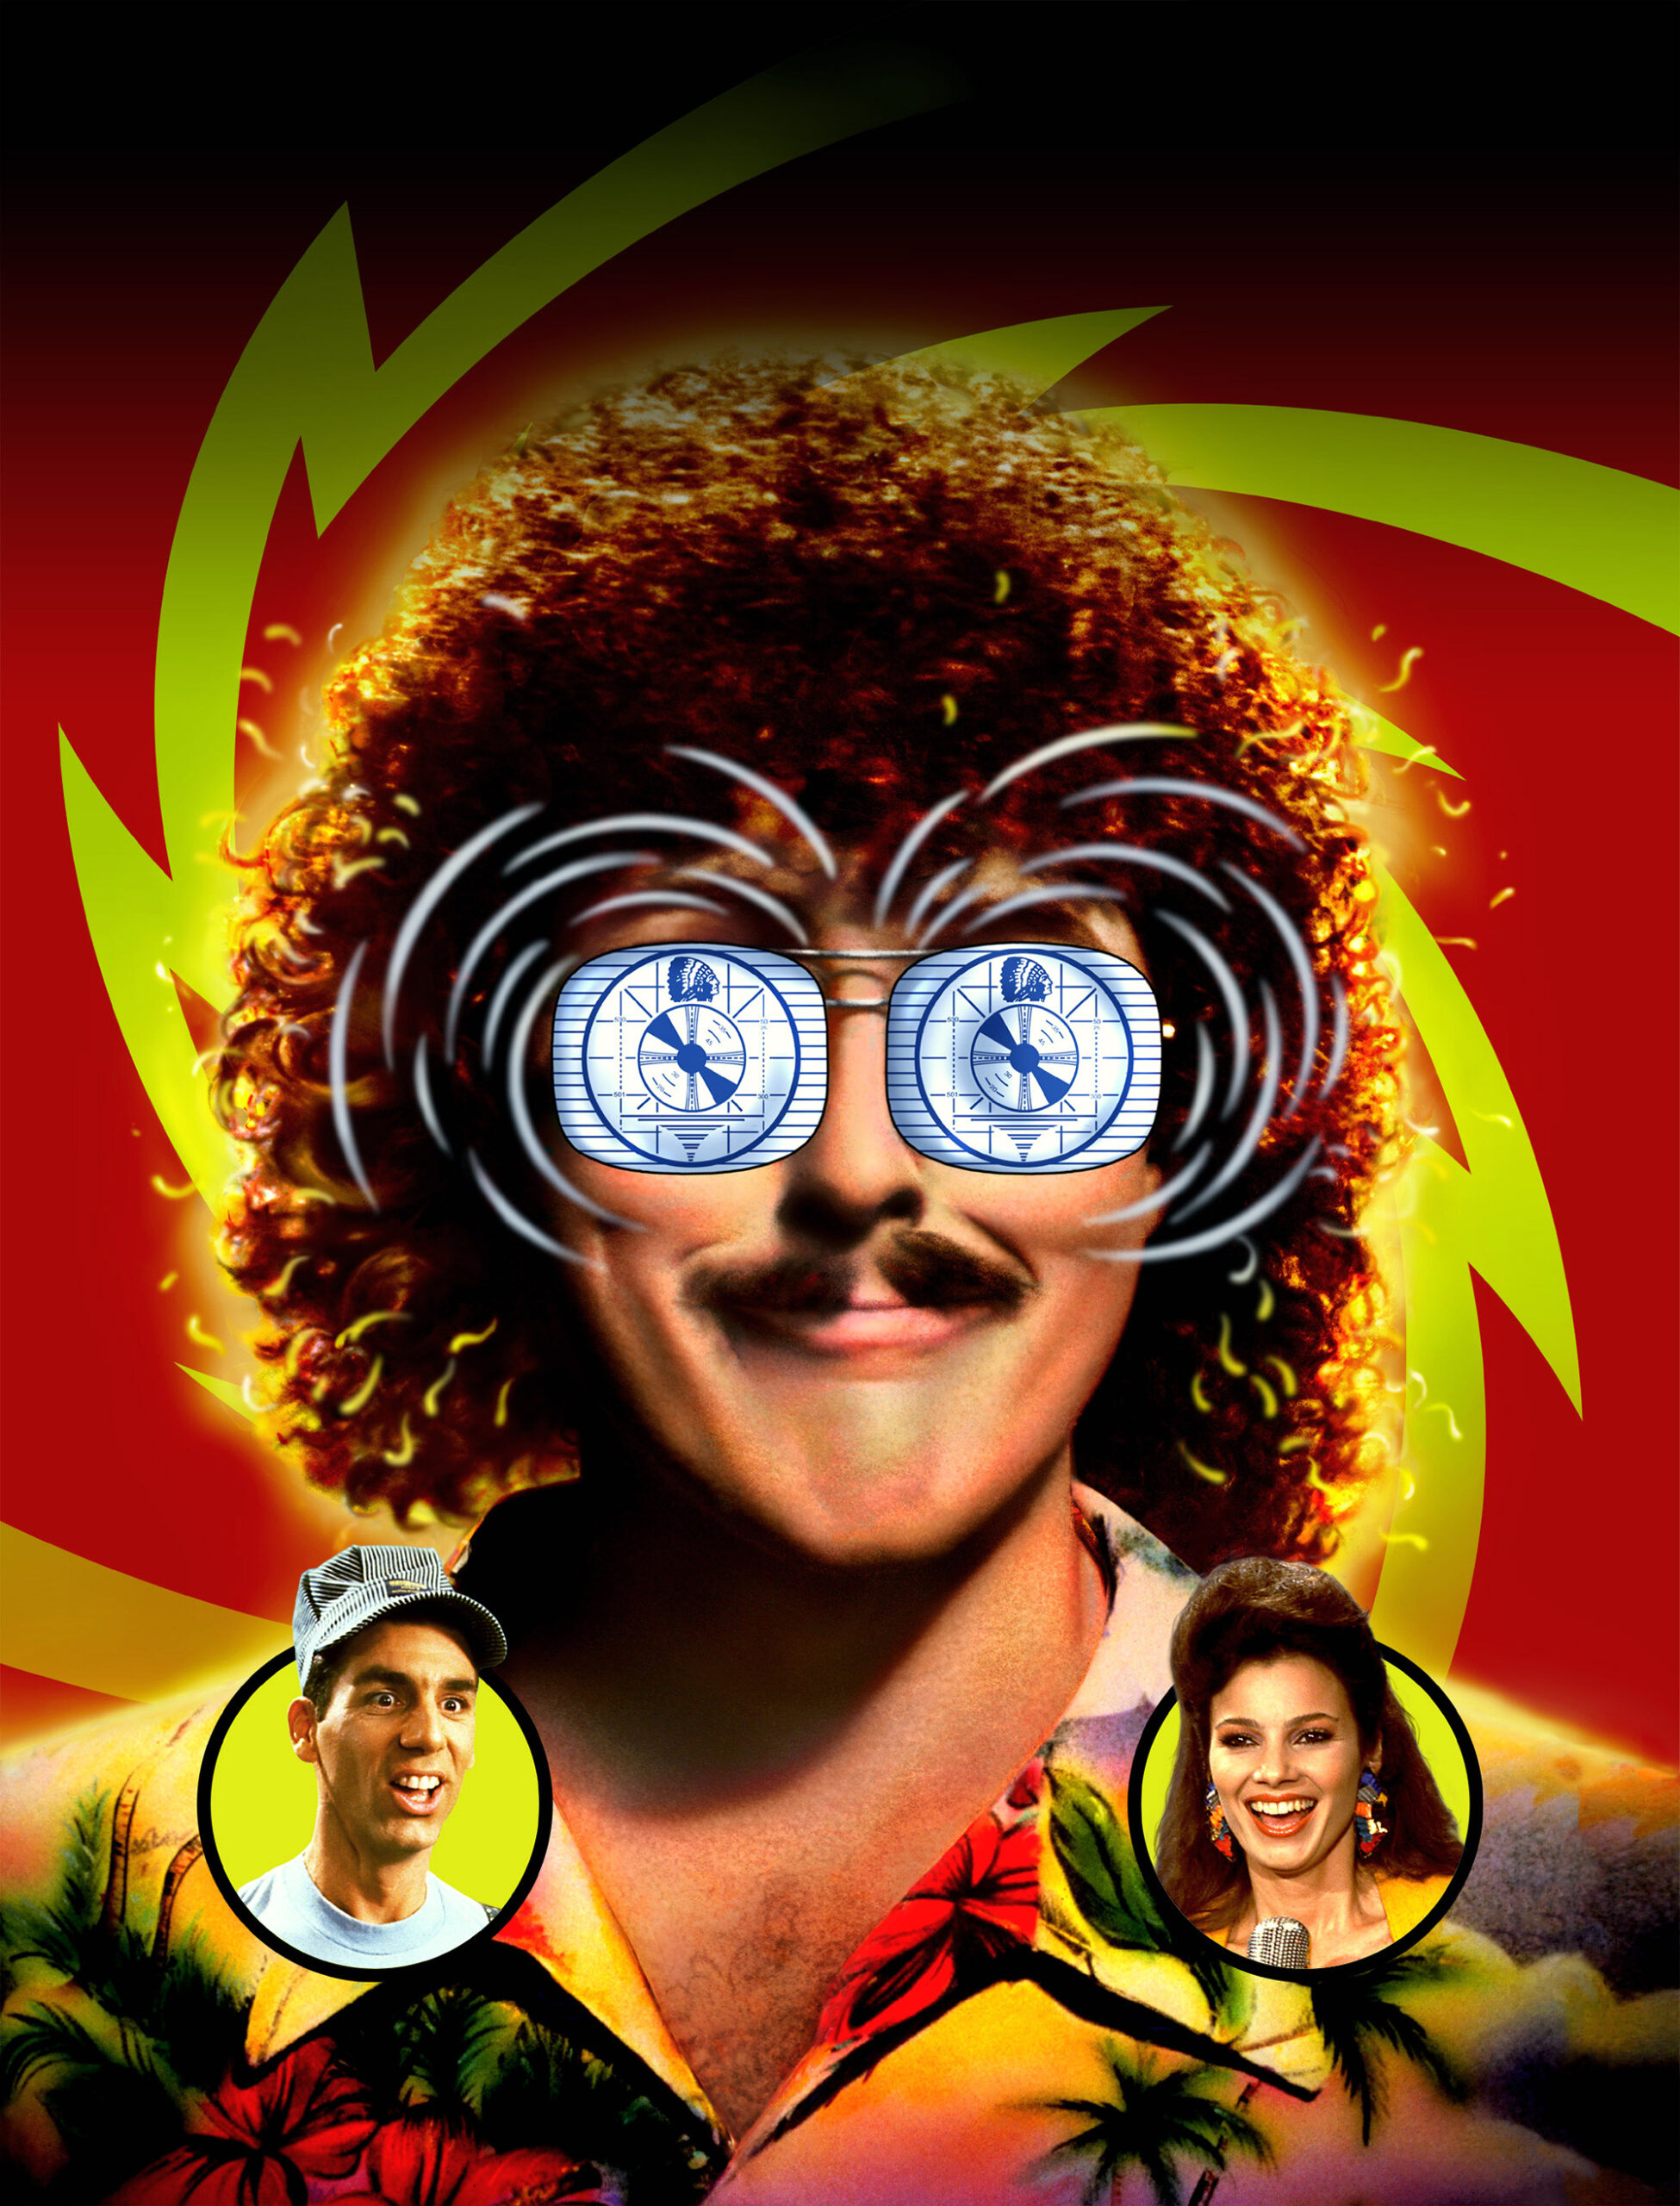 movie poster for the 1989 film "UHF." The illustration is largely taken up by "Weird Al" Yankovic's character, who is smiling and has TV screens in place of his eyes. In the bottom left is an illustration of Michael Richards' character, and on the bottom right, an Illustration of Fran Drescher's character.